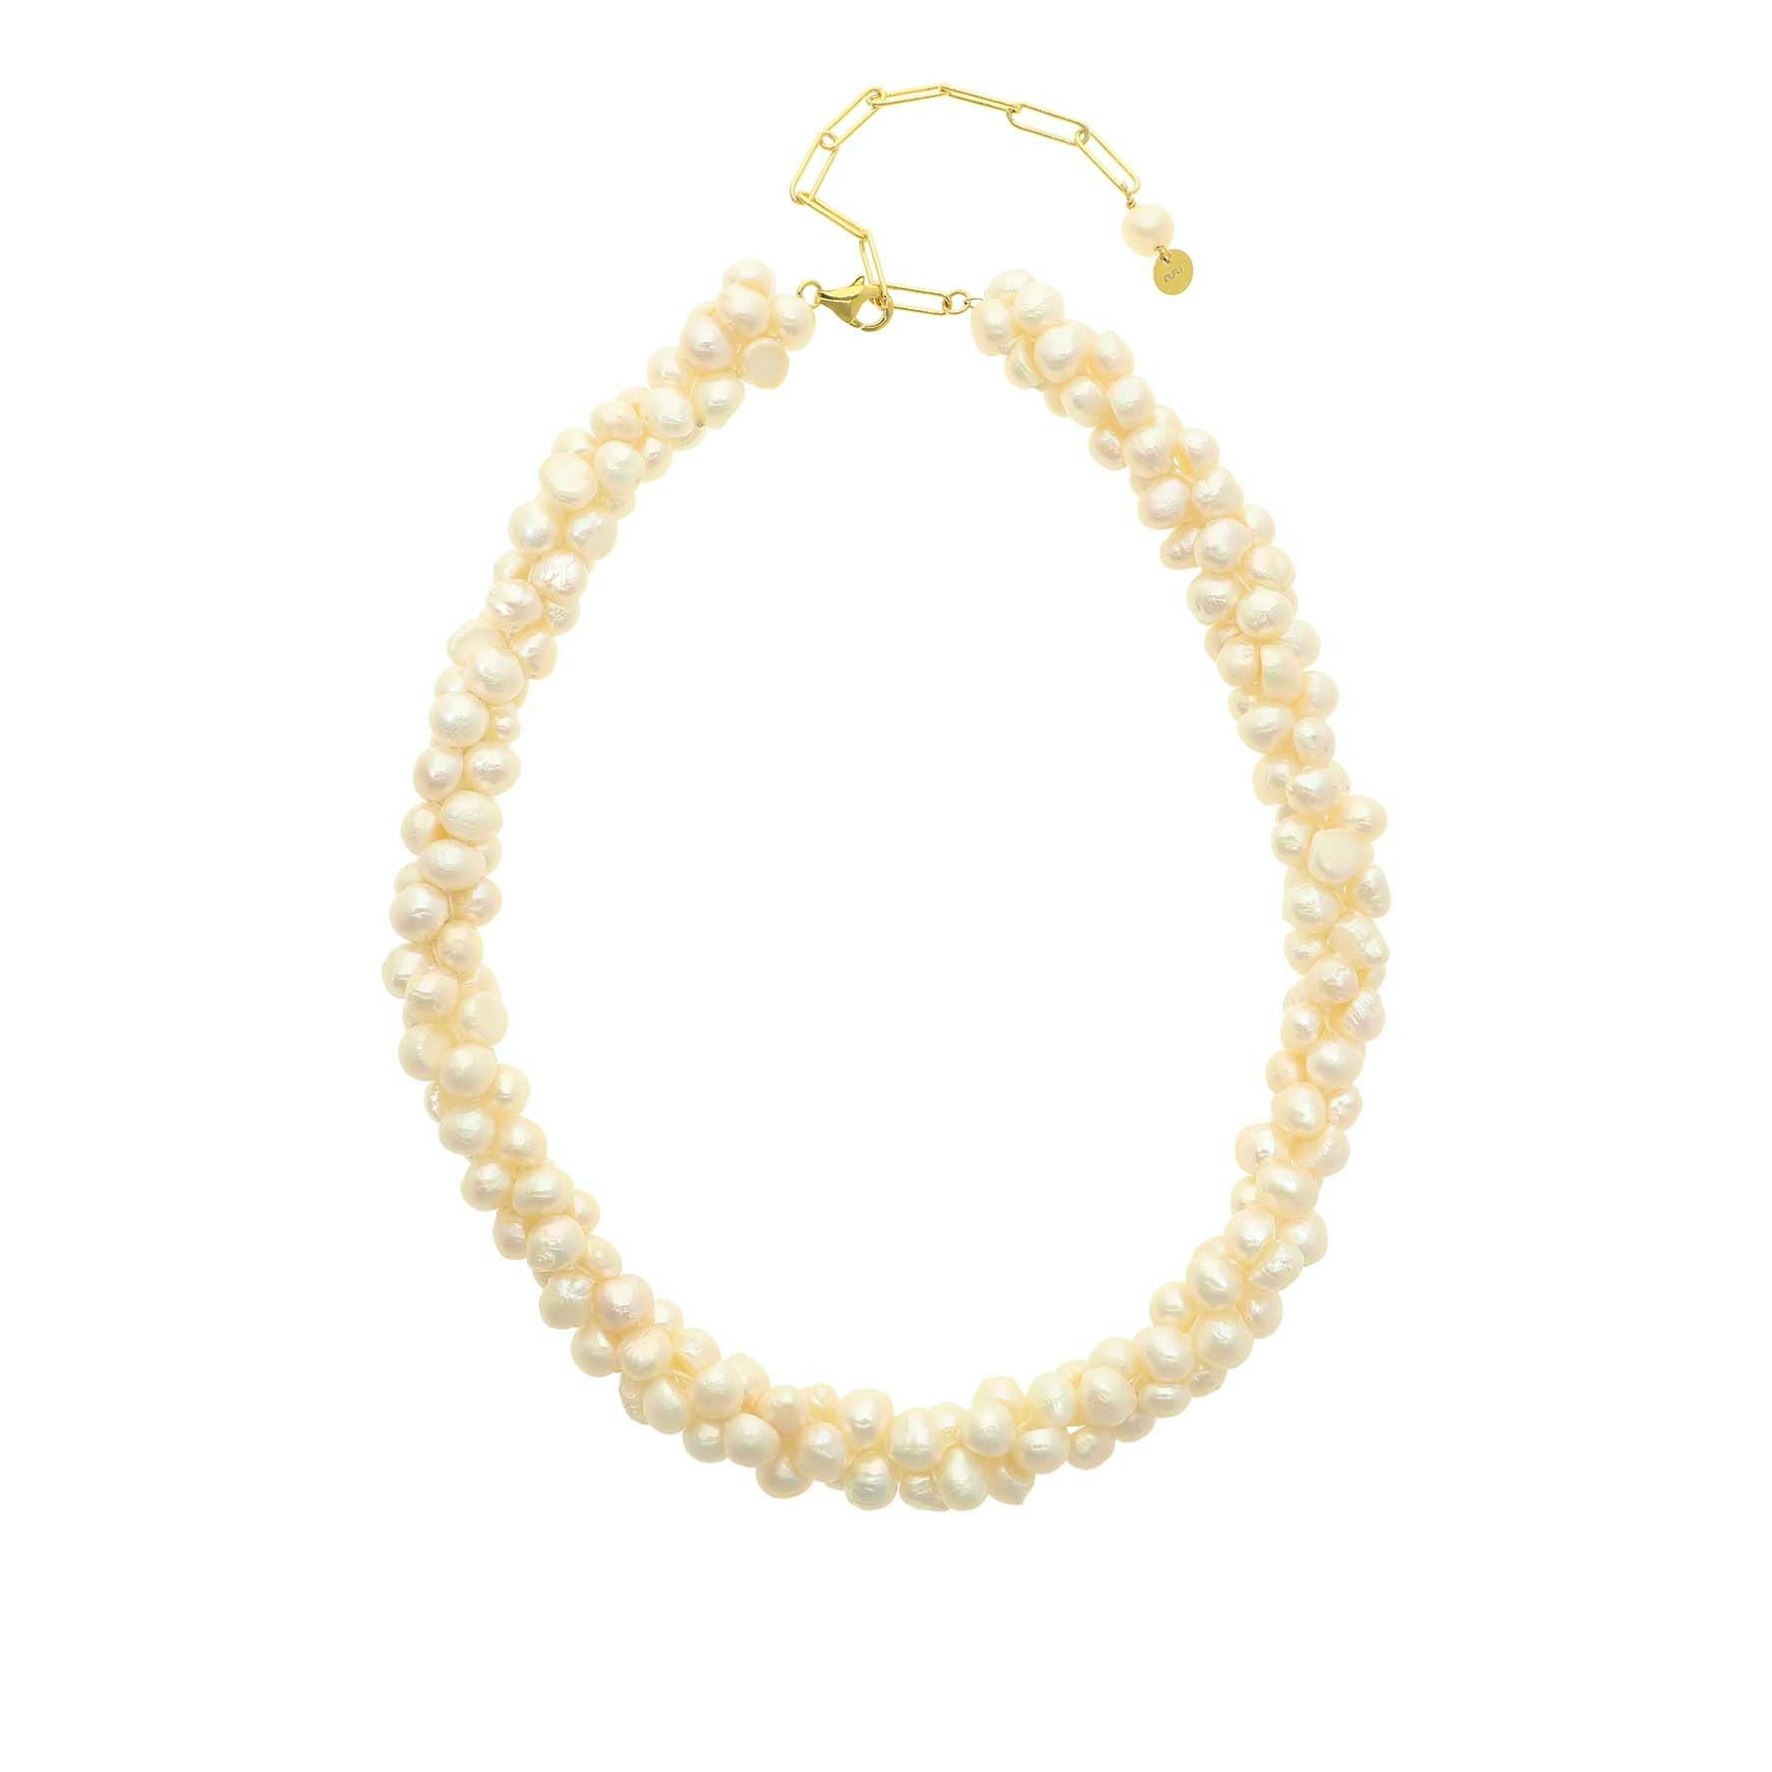 Leonora Necklace Pearl from Nuni Copenhagen in Goldplated Silver Sterling 925